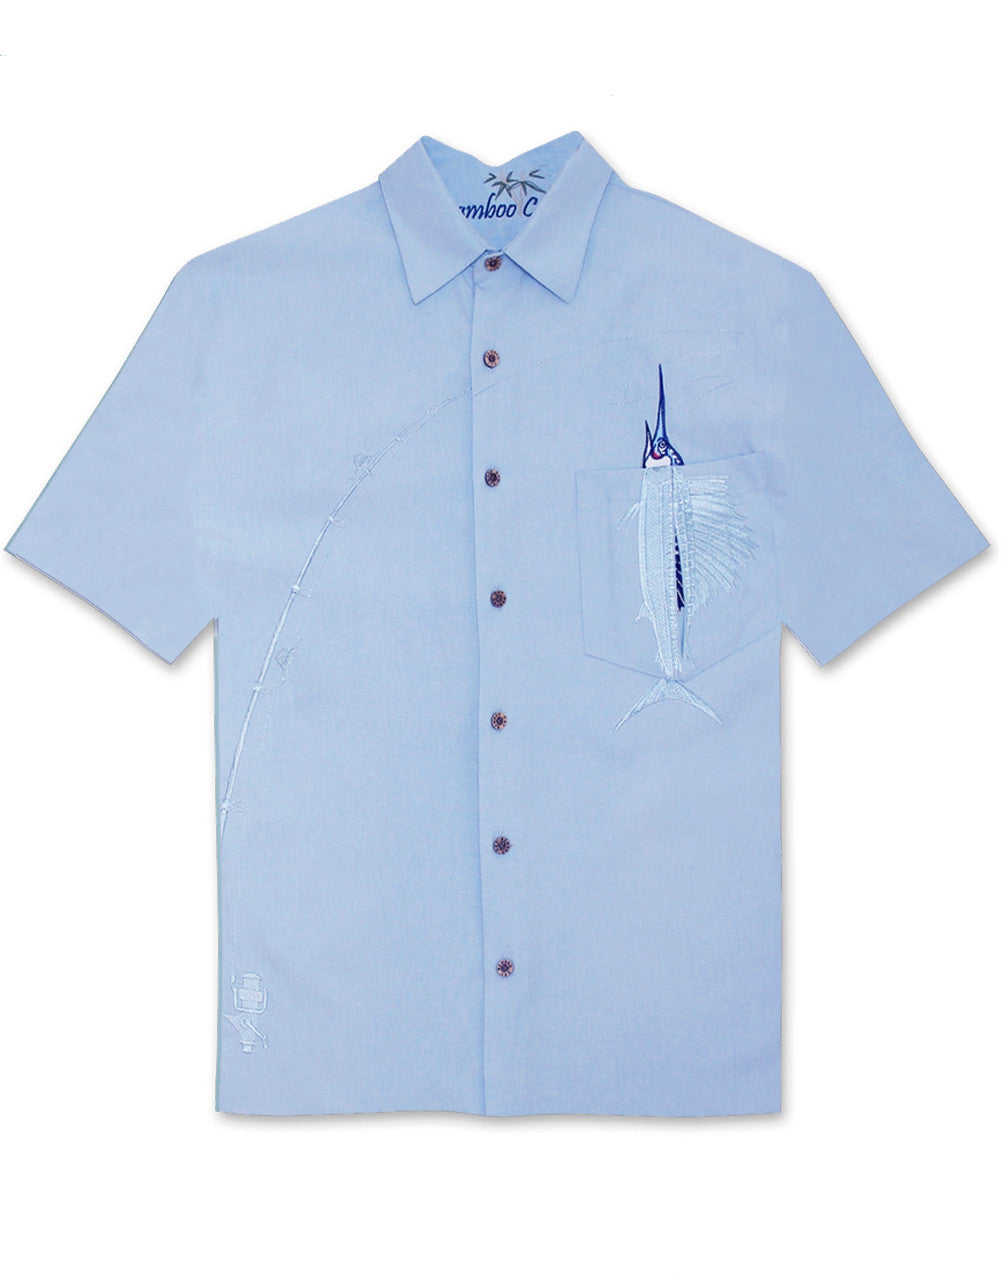 Shake the Hook Embroidered Camp Shirt by Bamboo Cay